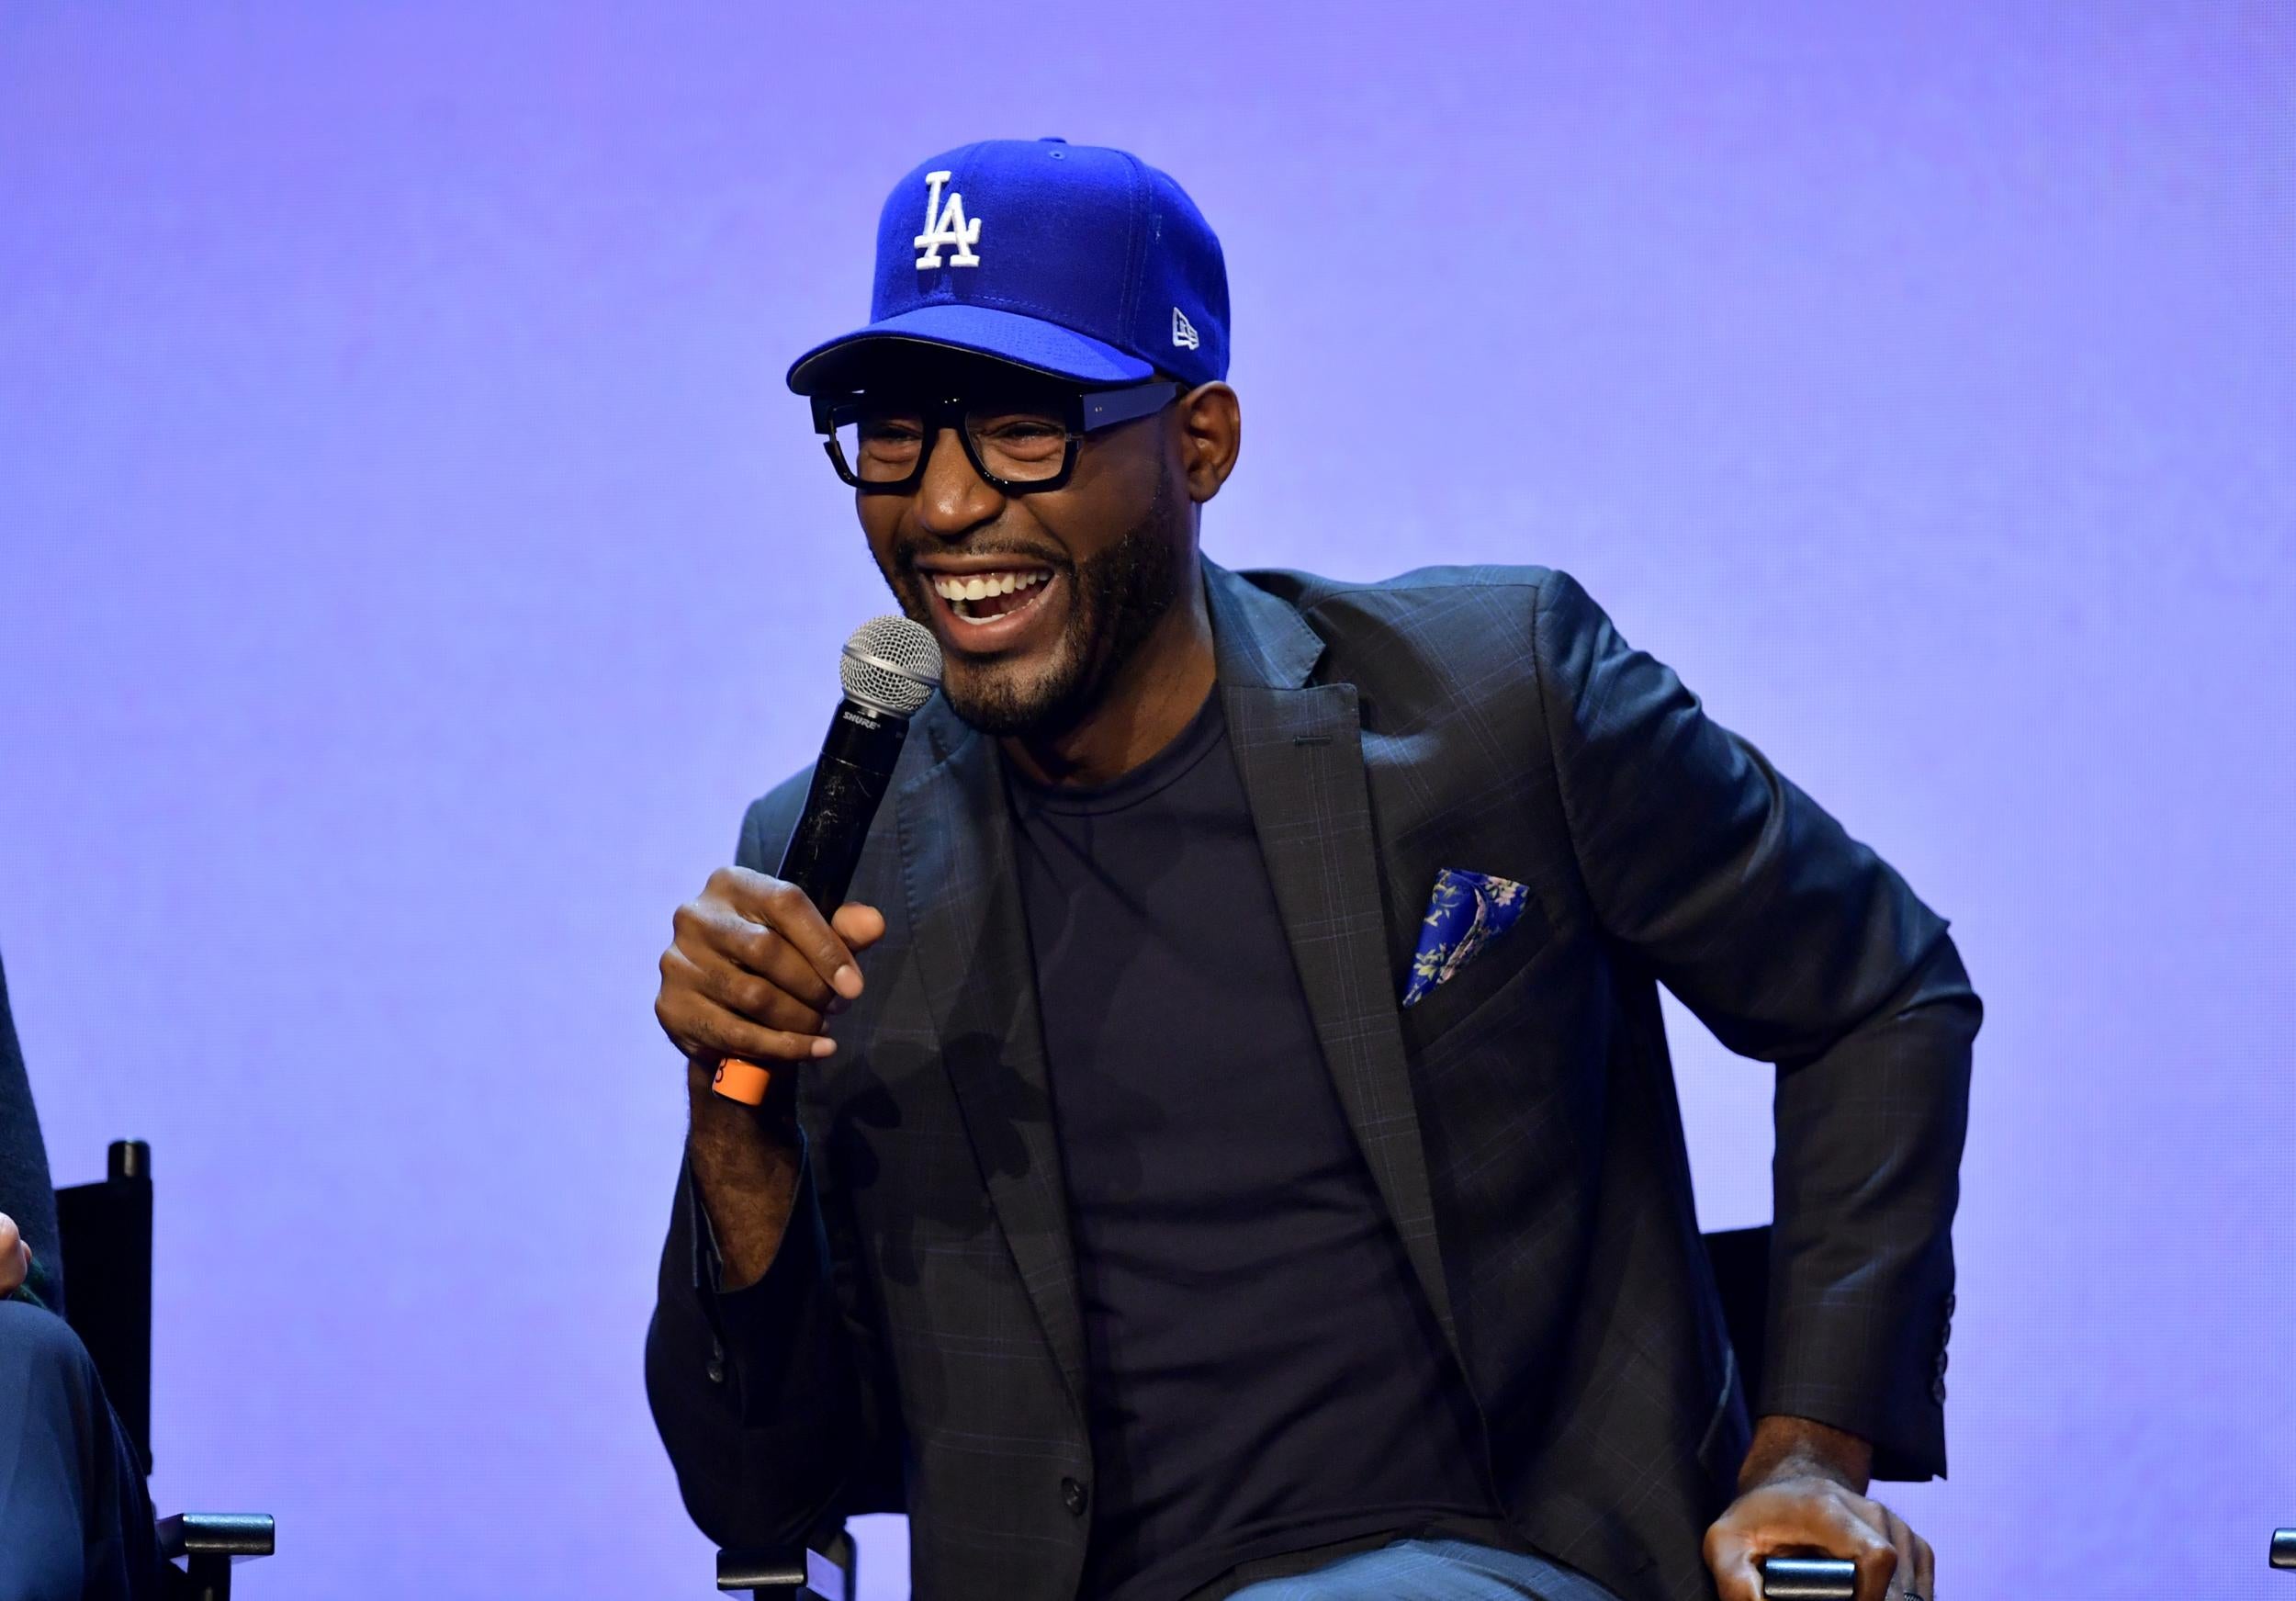 Karamo Brown's Twitter comment has sparked a valuable online conversation about ableism